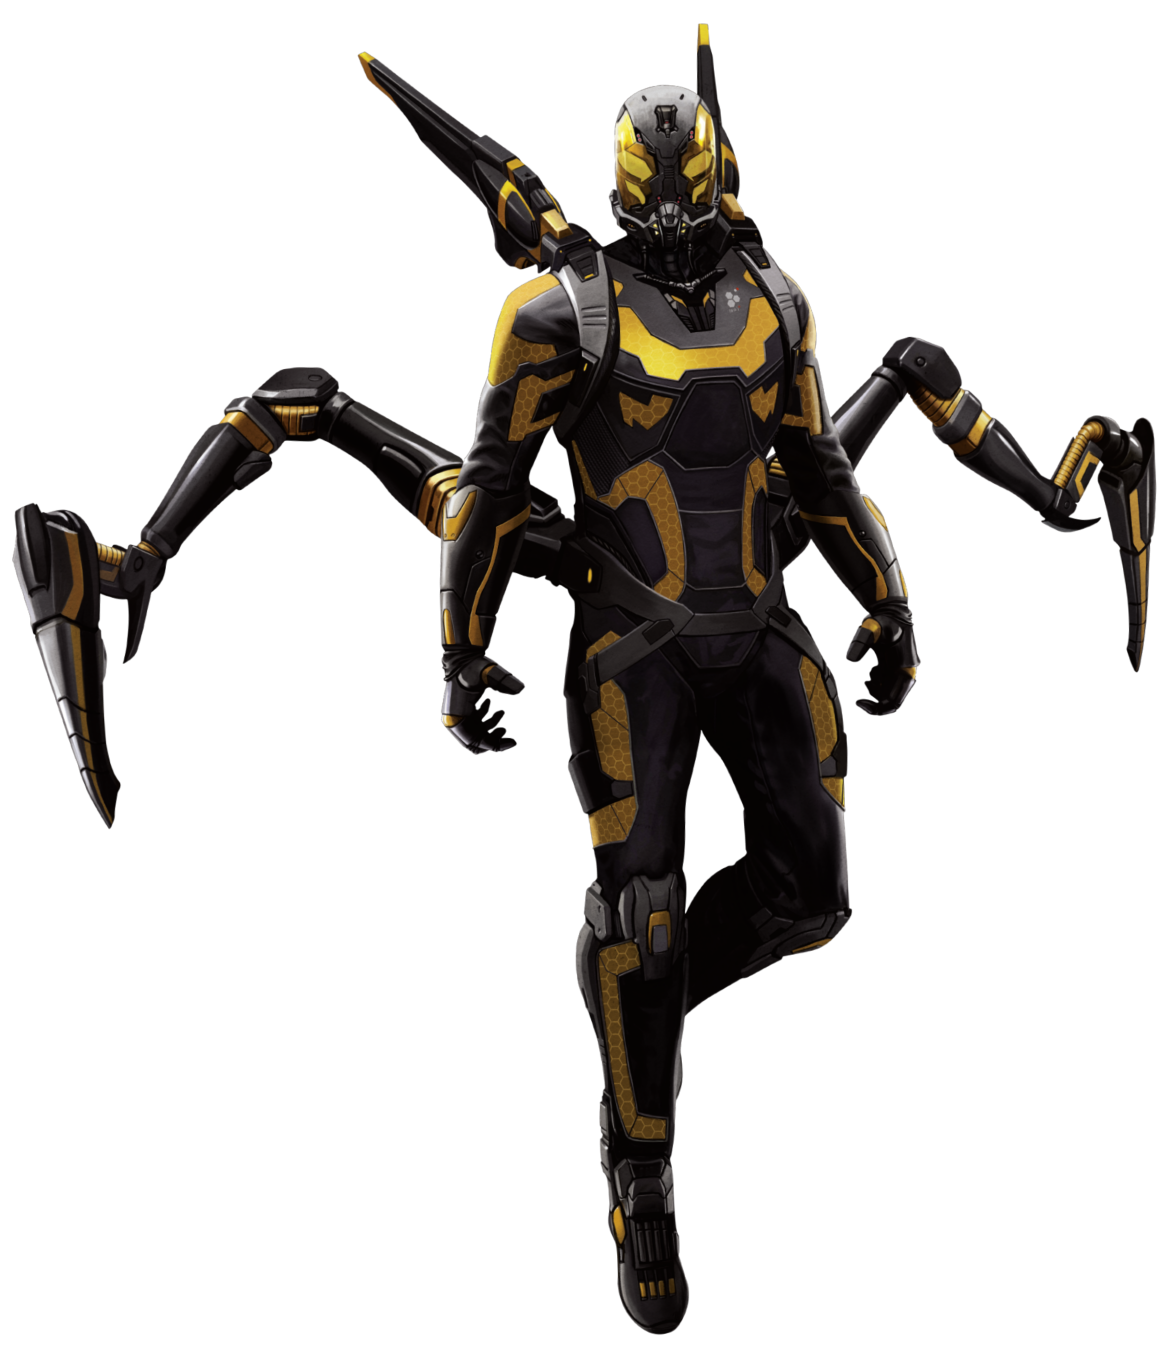 https://static.wikia.nocookie.net/marvelcinematicuniverse/images/2/2e/YellowJacket2_FH.png/revision/latest?cb=20161113062147